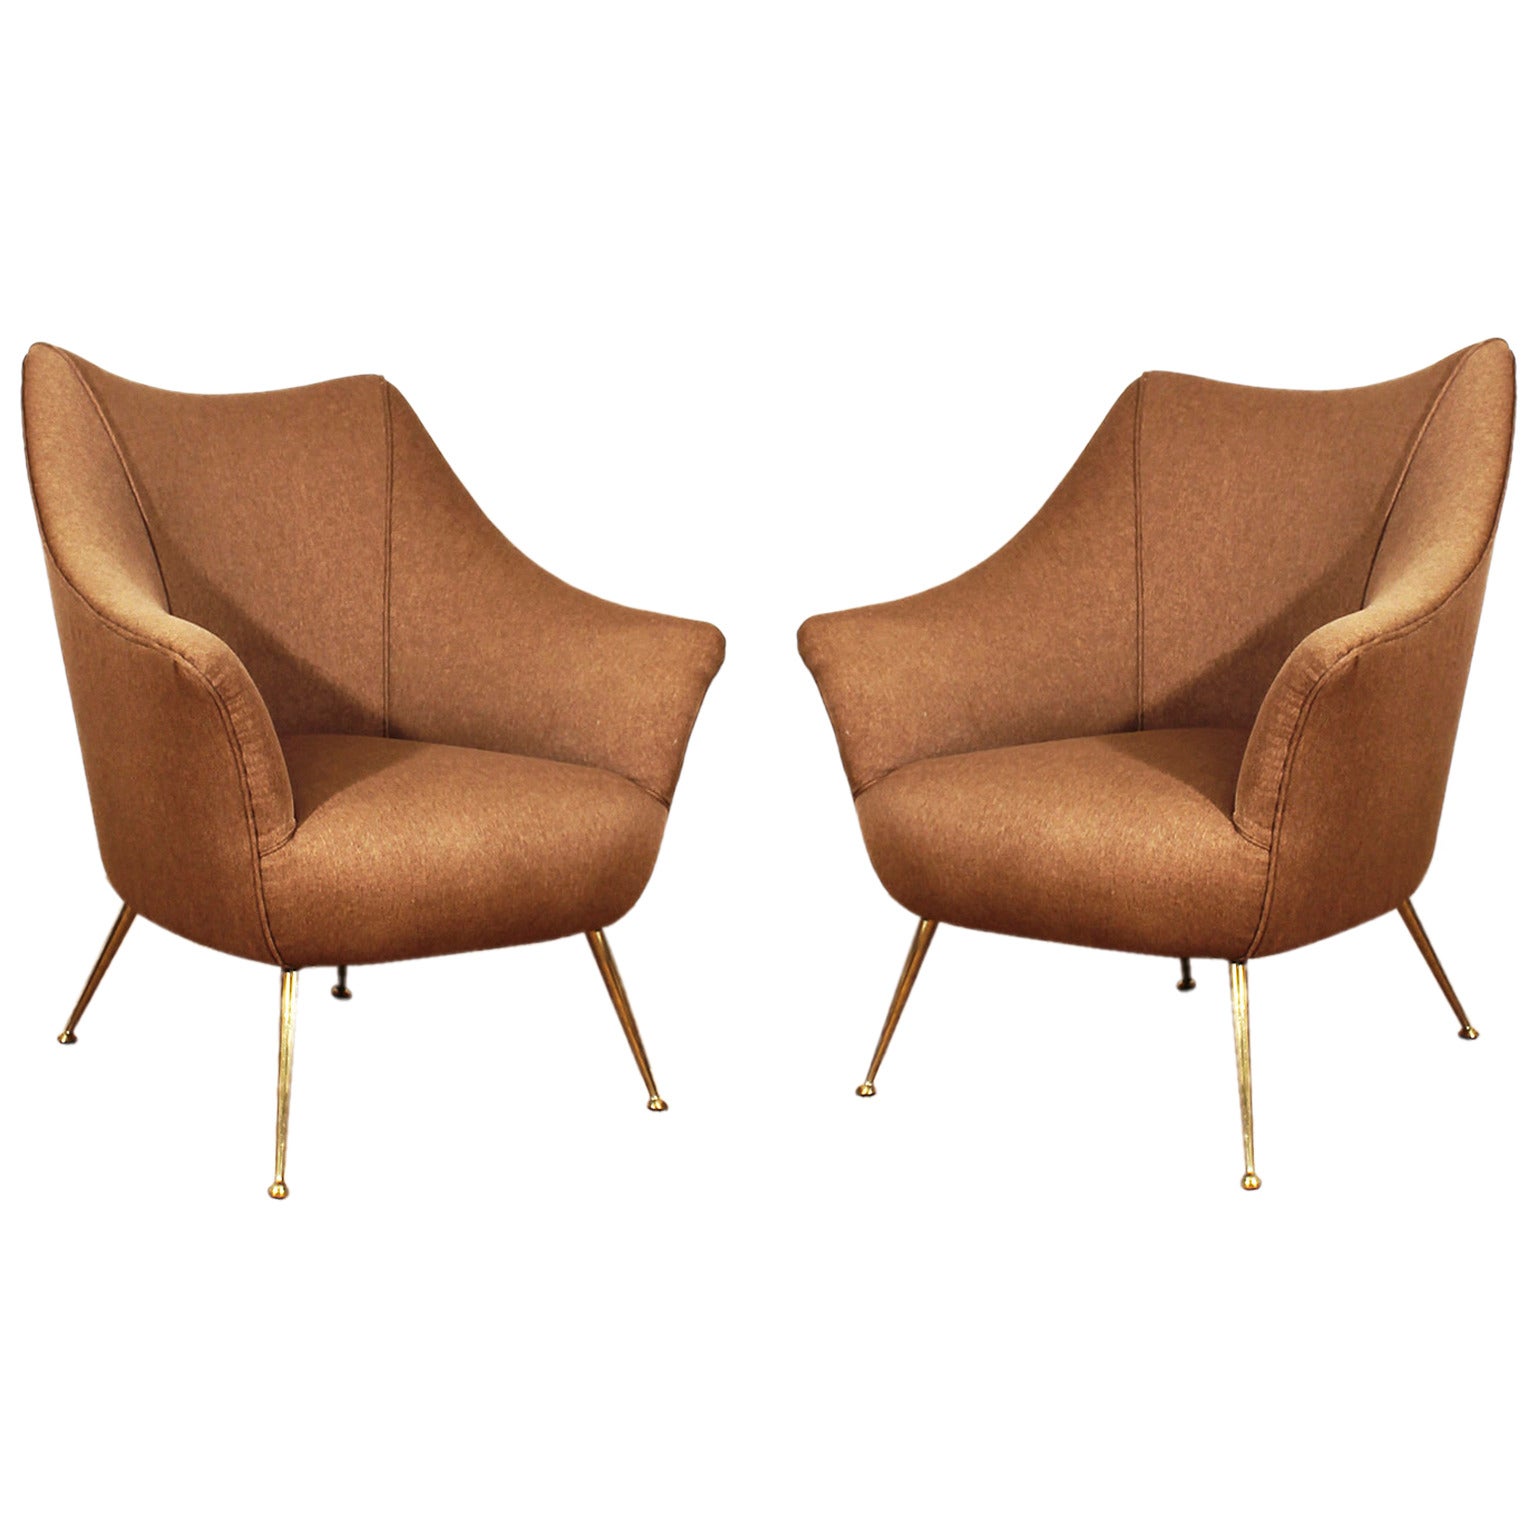 Pair of armchairs from the 1950´s